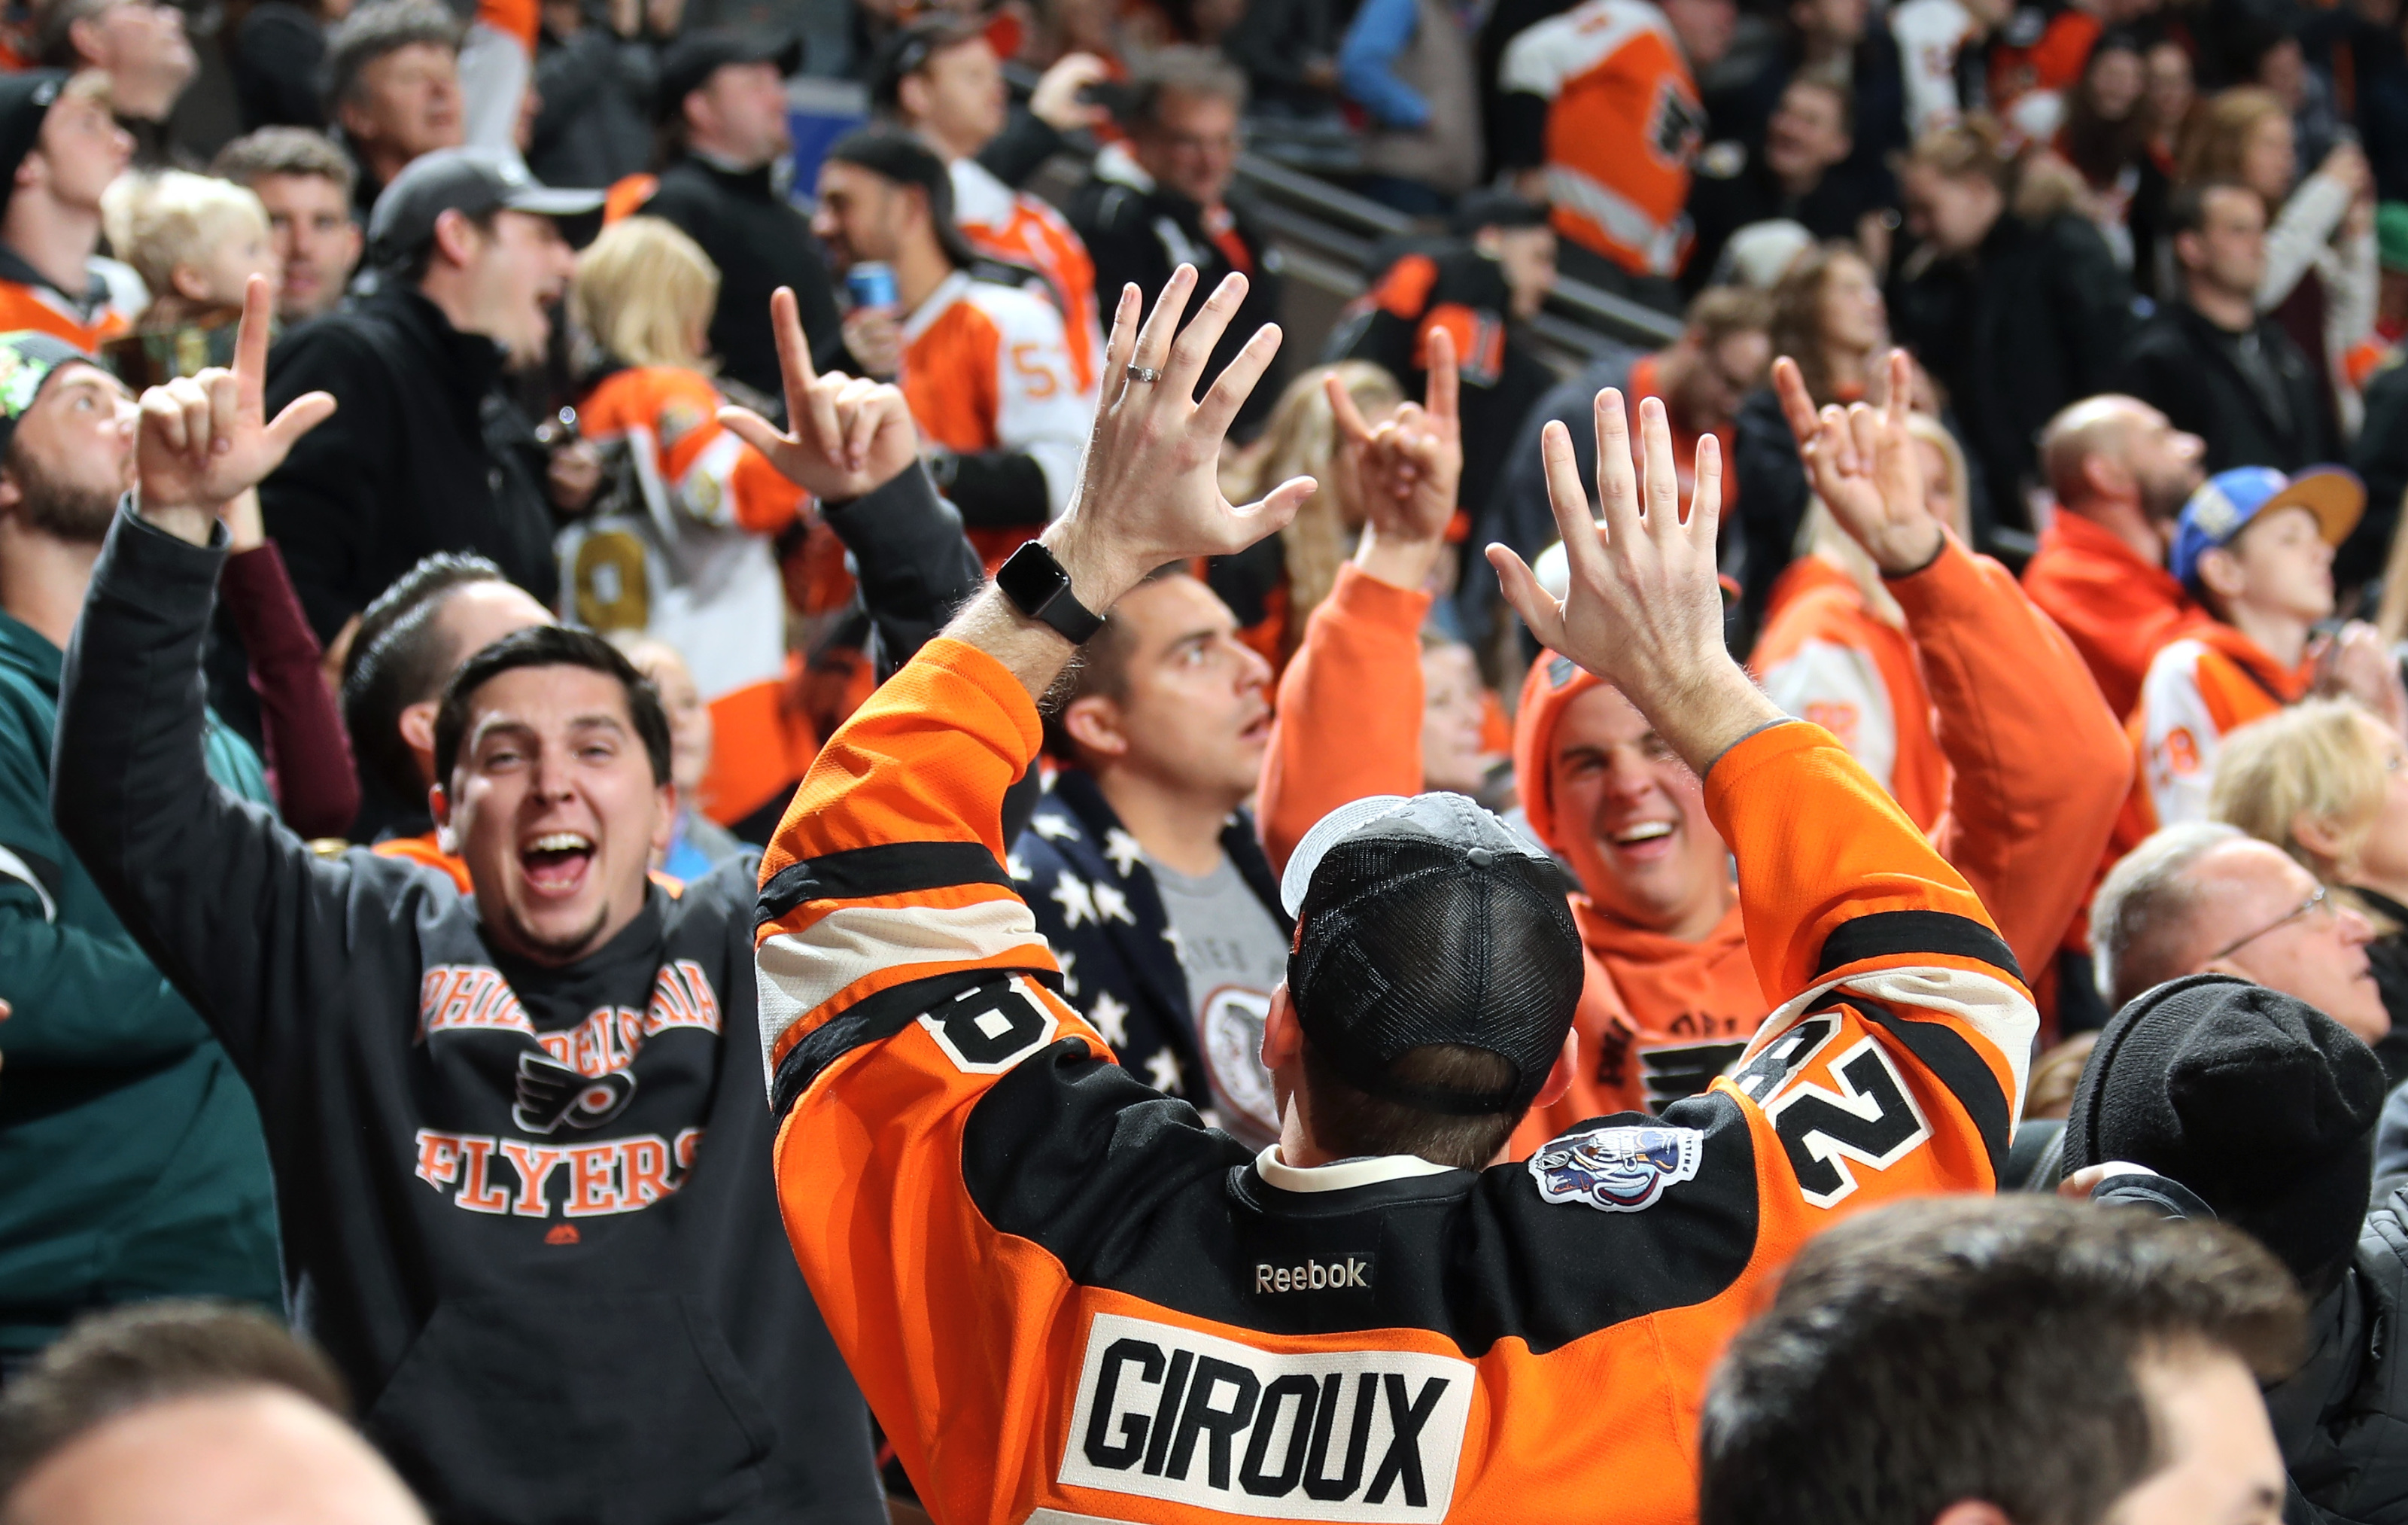 Here Are the Flyers' Stadium Series Jerseys - Crossing Broad